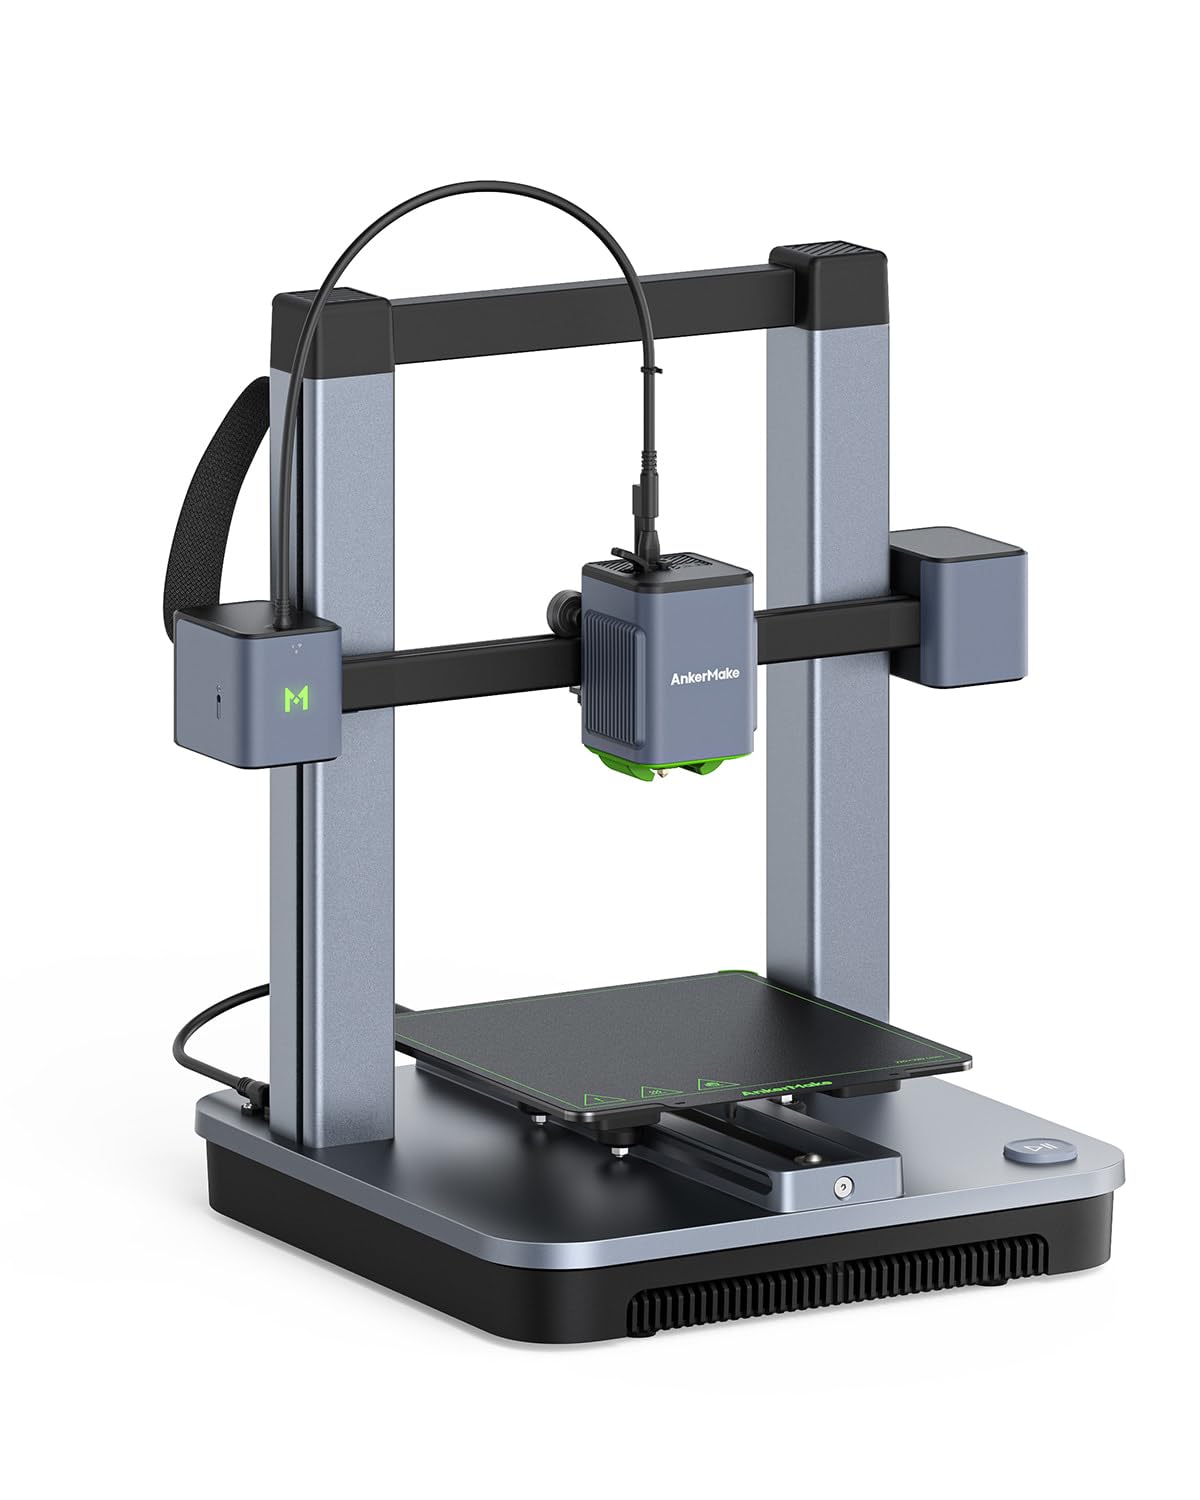 Prime Exclusive: AnkerMake M5C 3D Printer, 500 mm/s High-Speed Printing, Multi-Device Wireless Control $319 + Free Shipping